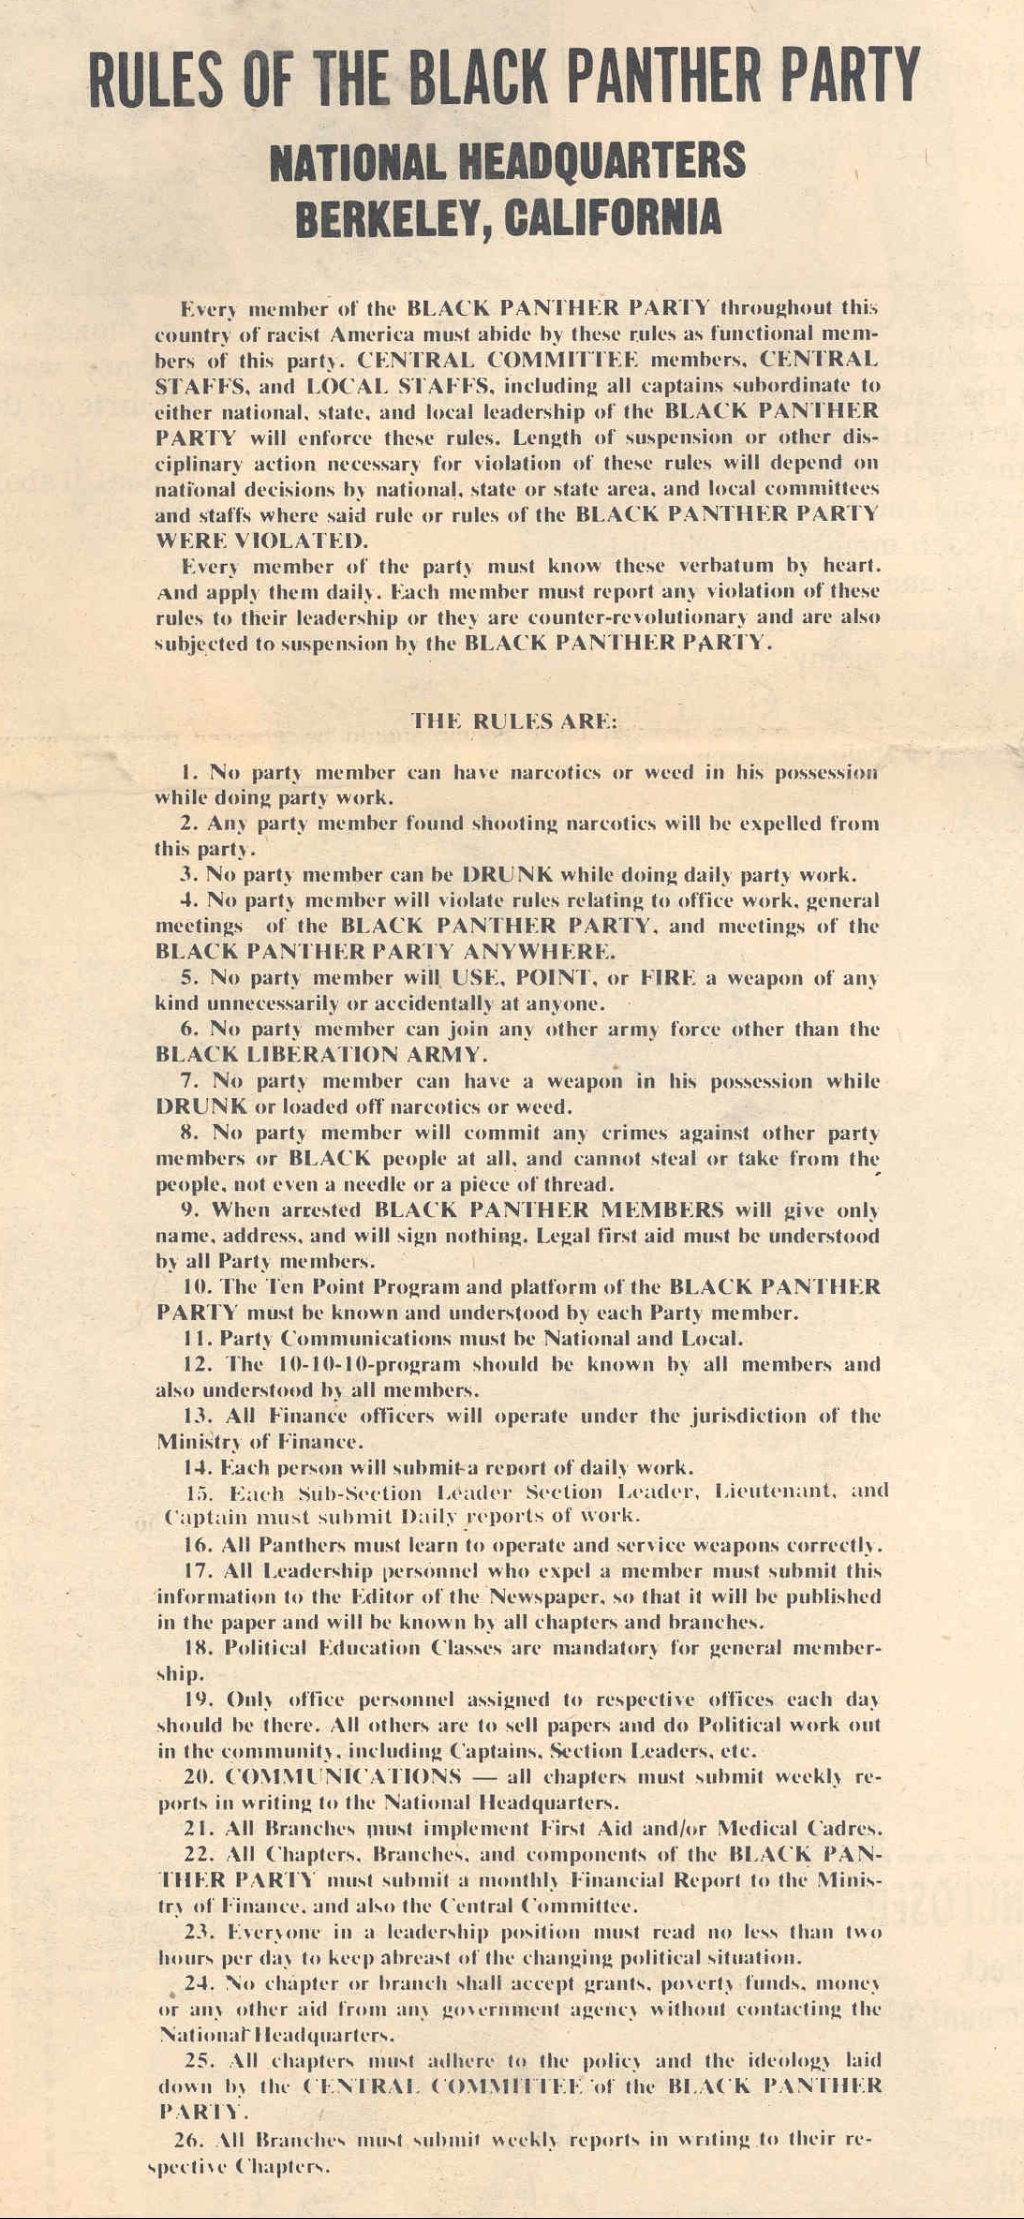 Rules of the Black Panther Party, National Headquarters, Berkeley, California, 1970